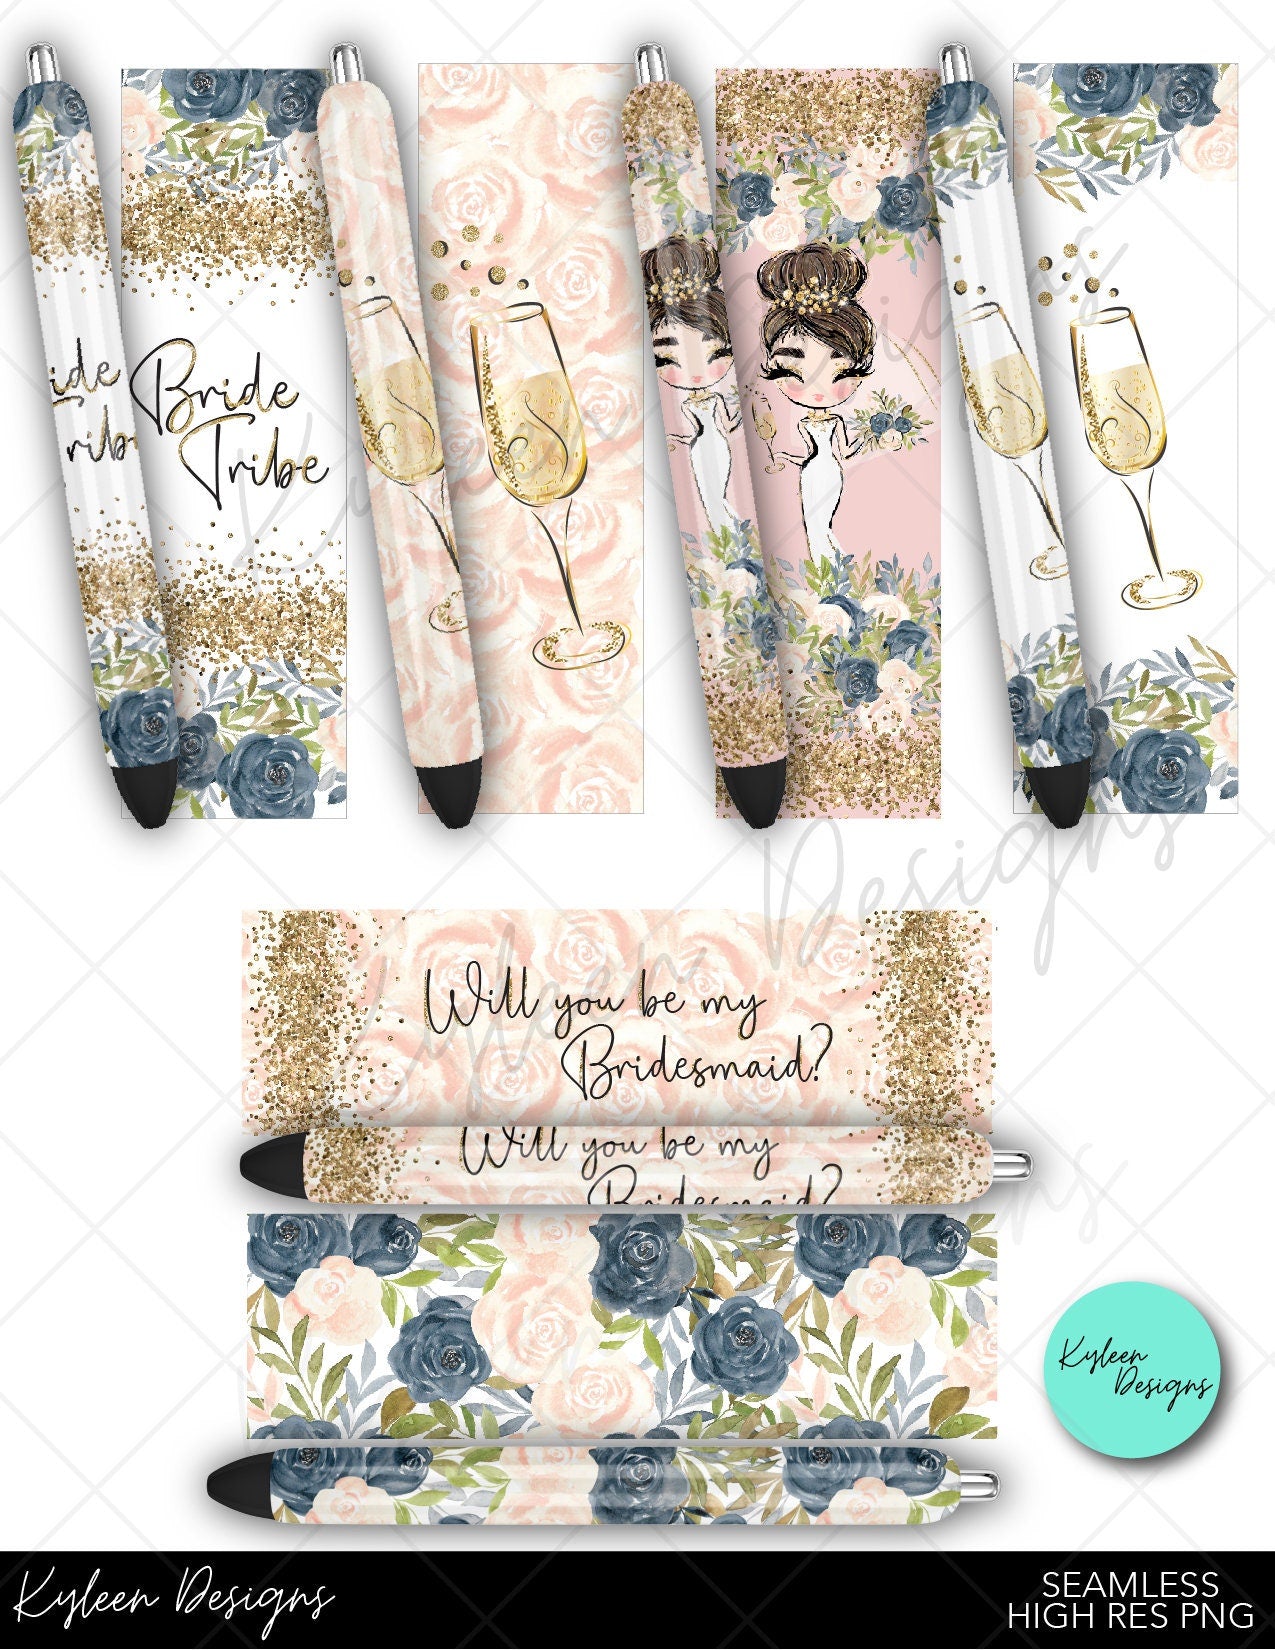 SEAMLESS Bride- Bridesmaid pen wraps for waterslide high RES PNG